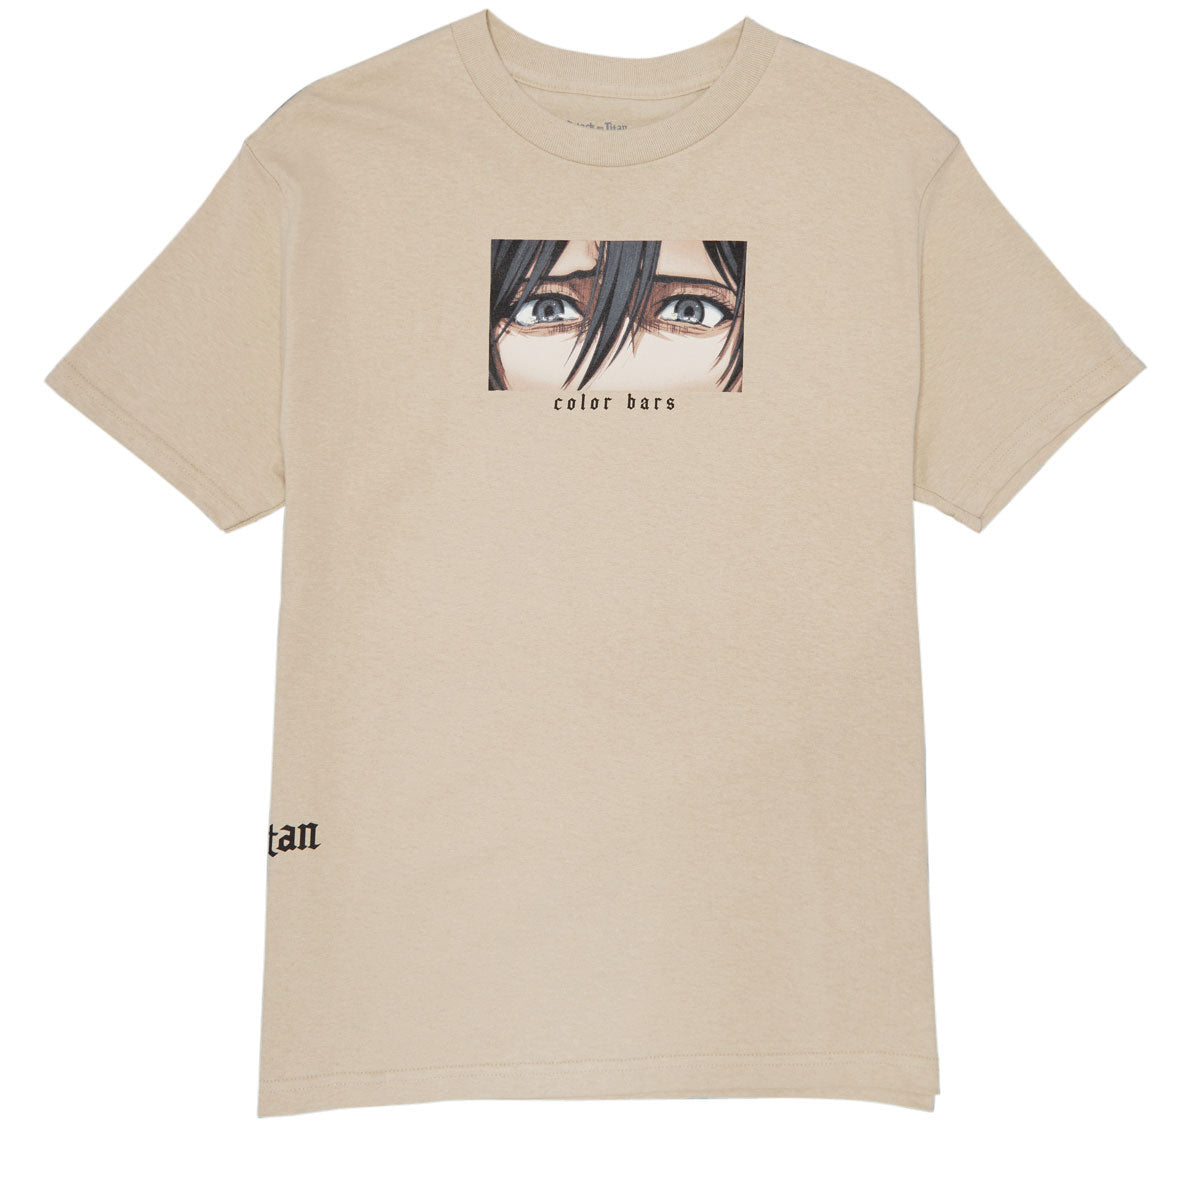 Color Bars x Attack on Titan Witness T-Shirt - Sand image 1